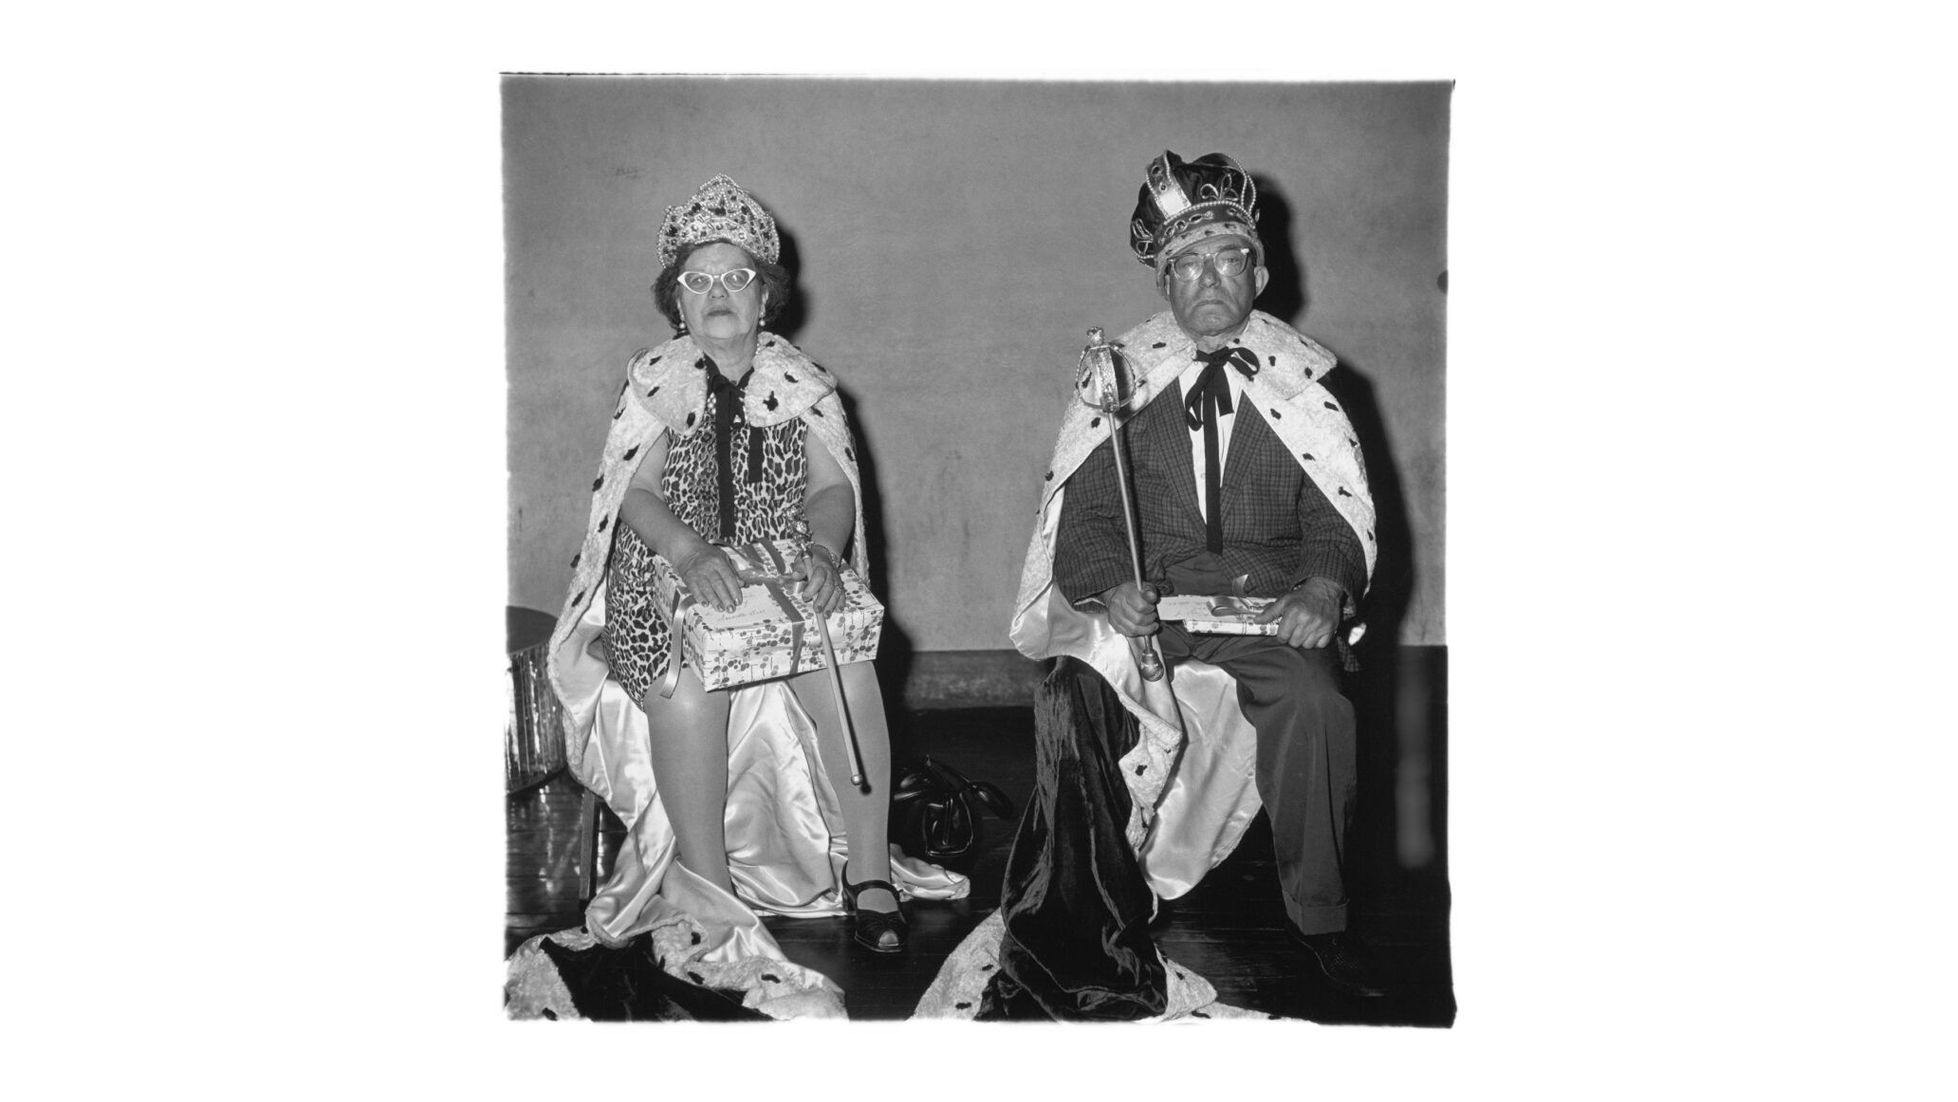 An artwork by Diane arbus titled The King and Queen of a Senior Citizens Dance, N.Y.C. dated 1970